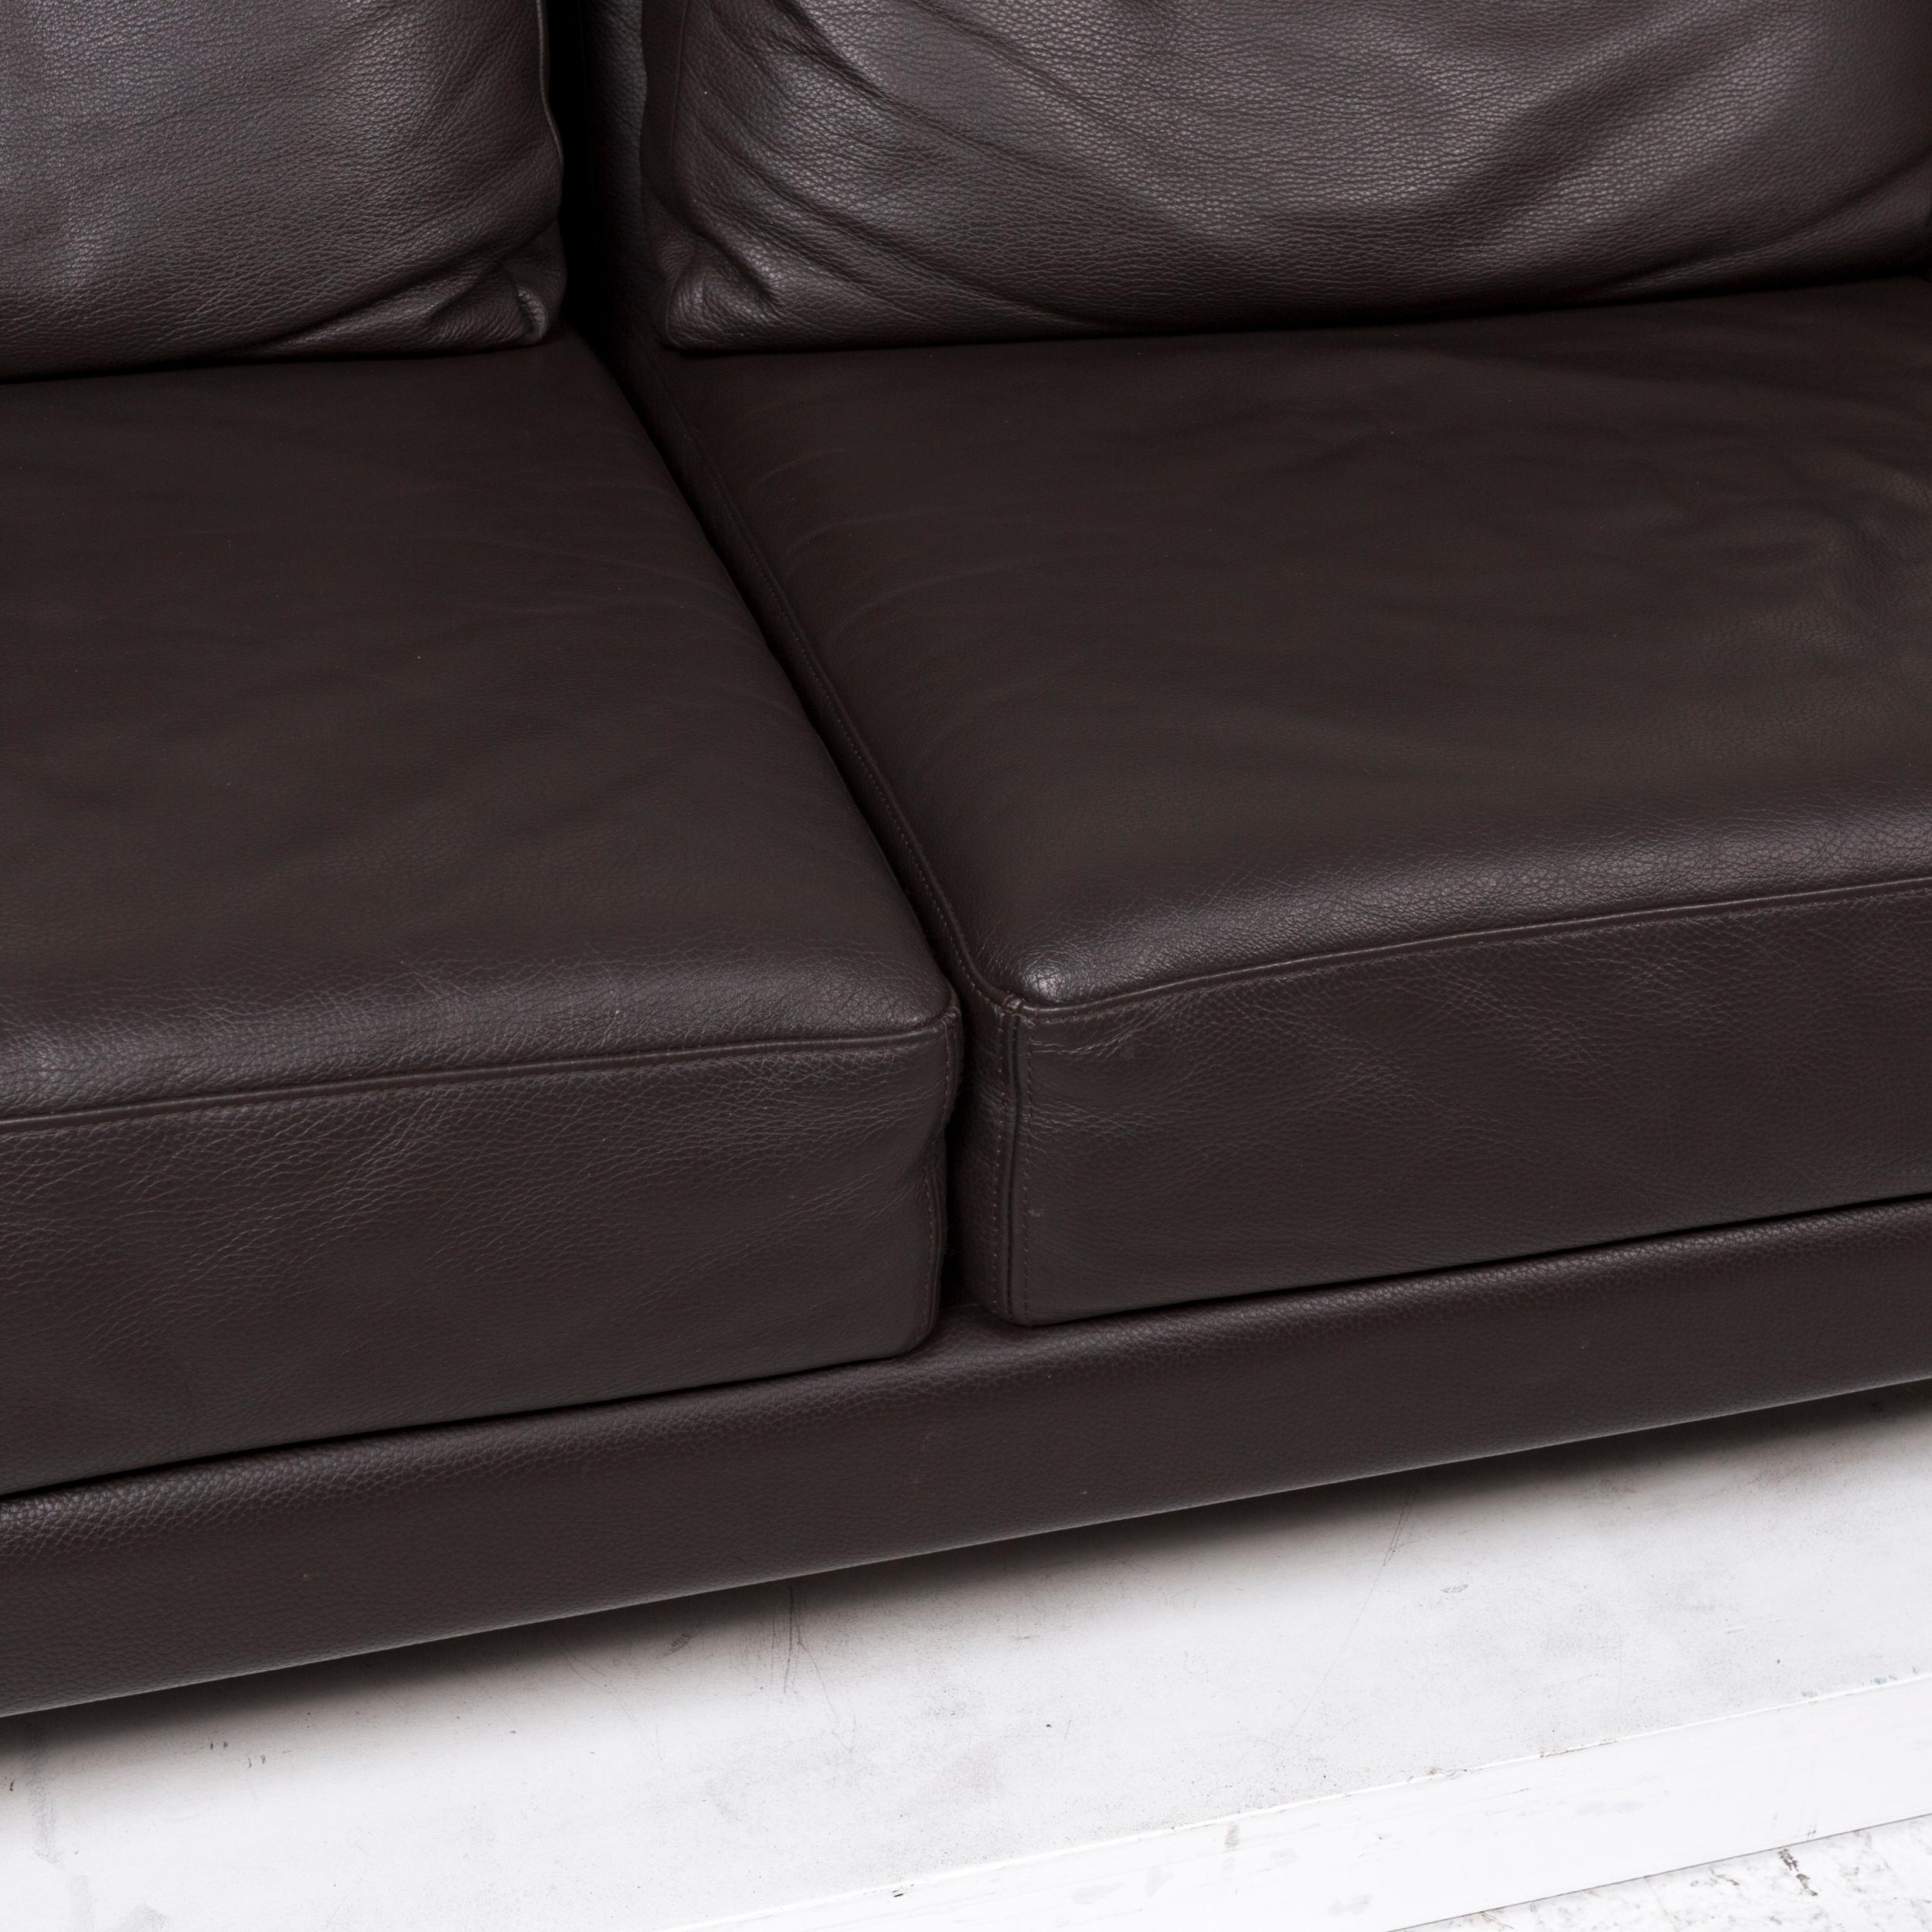 German Brühl & Sippold Moule Leather Sofa Brown Dark Brown Relax Function Couch For Sale